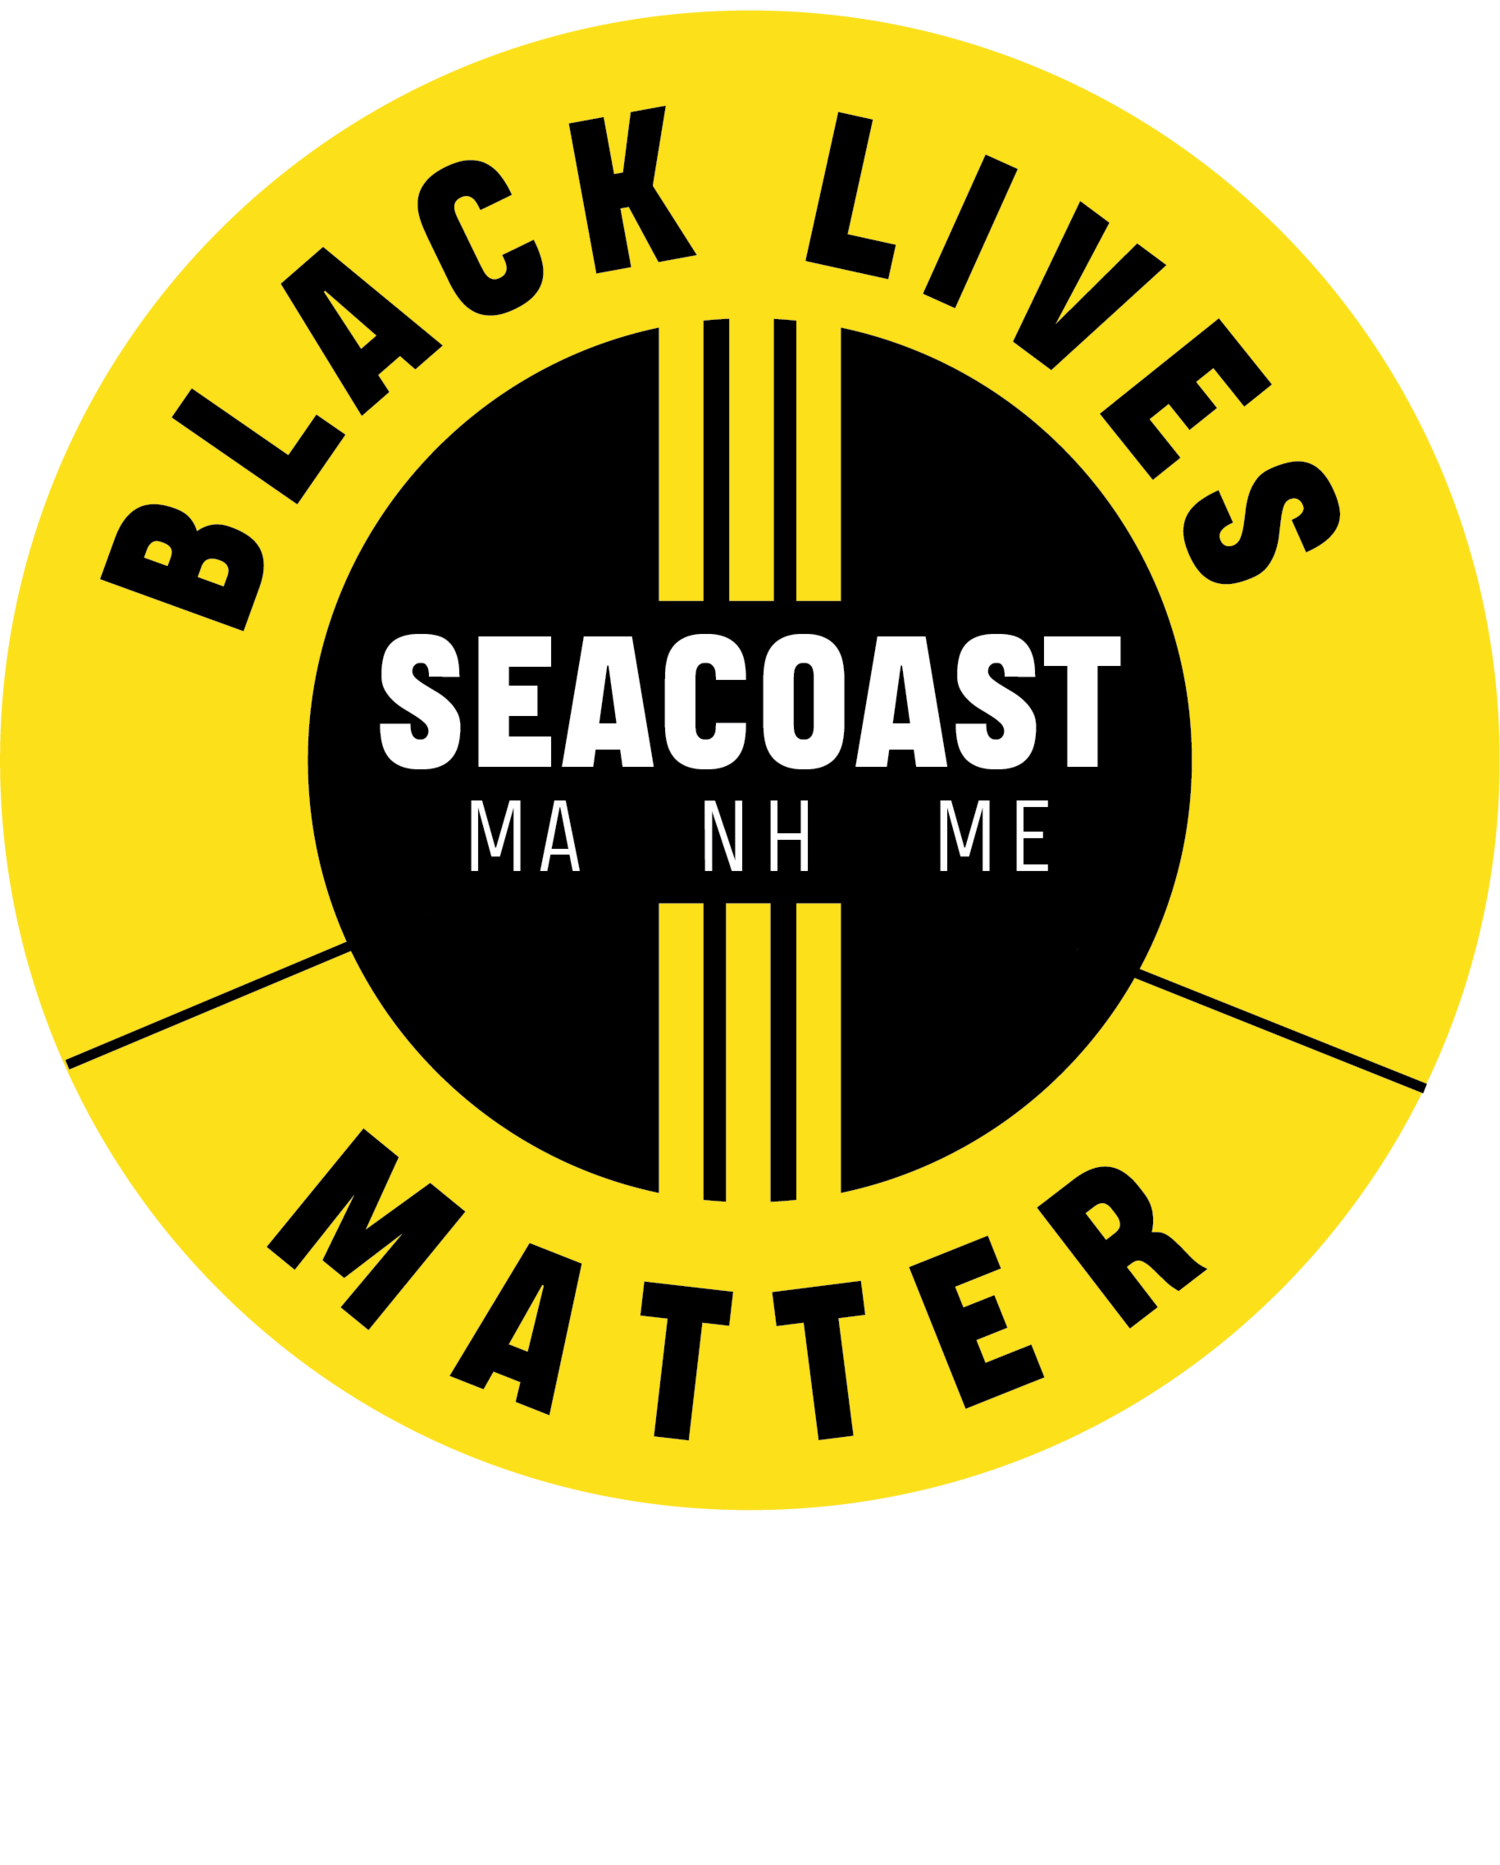 circular logo in yellow with words Black Lives Matter Seacoast